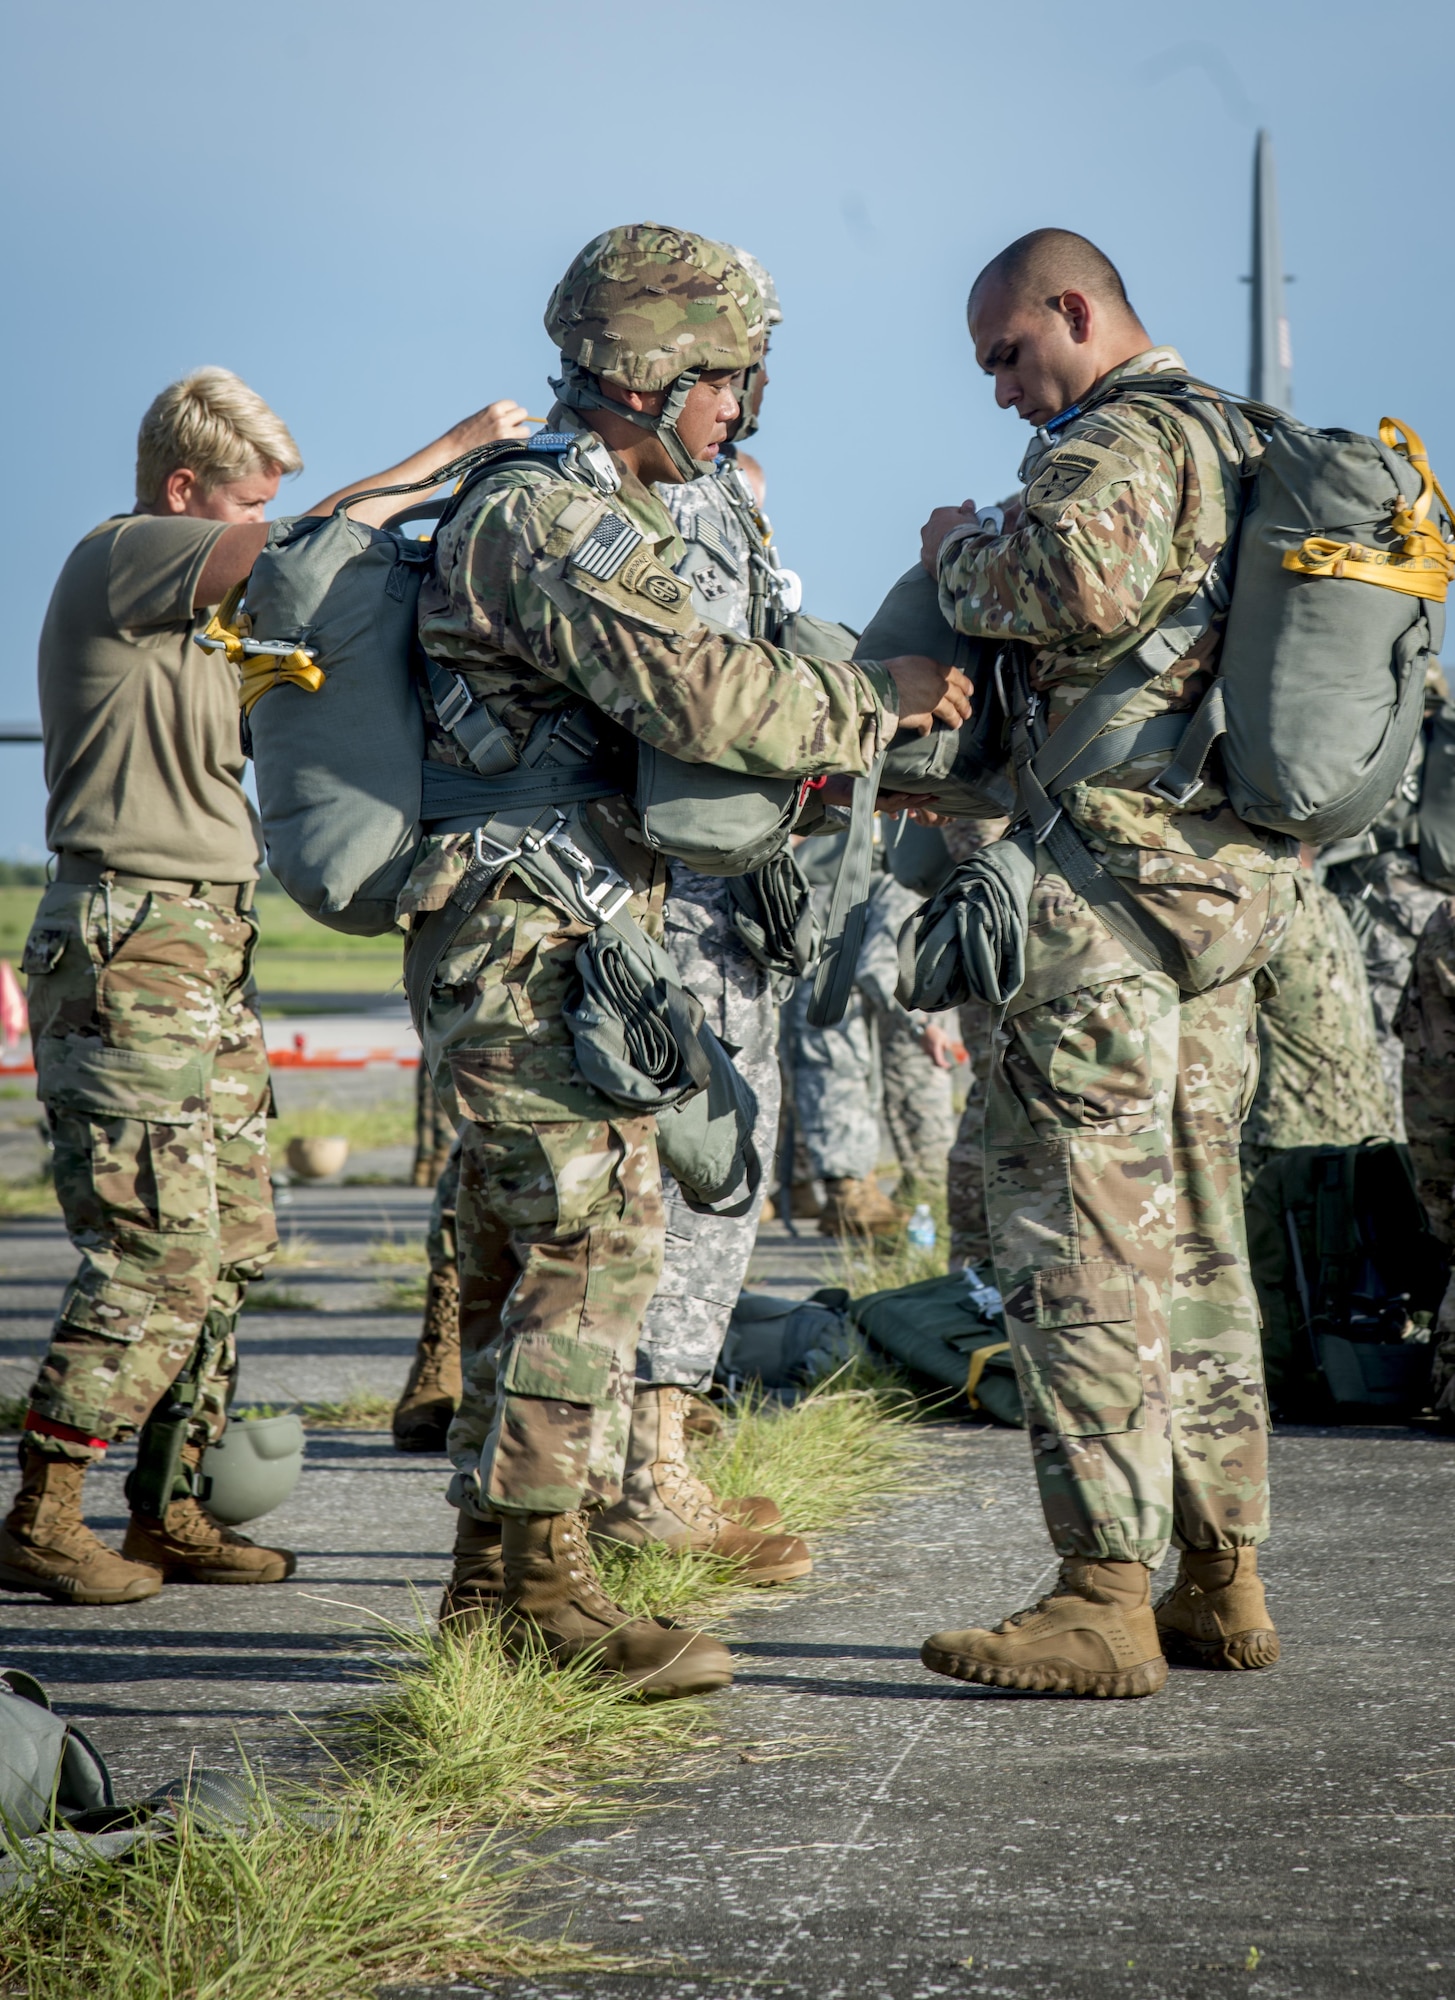 Service members from MacDill Air Force Base, Fla., put their parachute gear on before their flight in Brooksville, Fla., July 15, 2017. Before a service members can jump, they must run through safety instructions and procedures. (U.S. Air Force photo by Senior Airmen Mariette Adams)